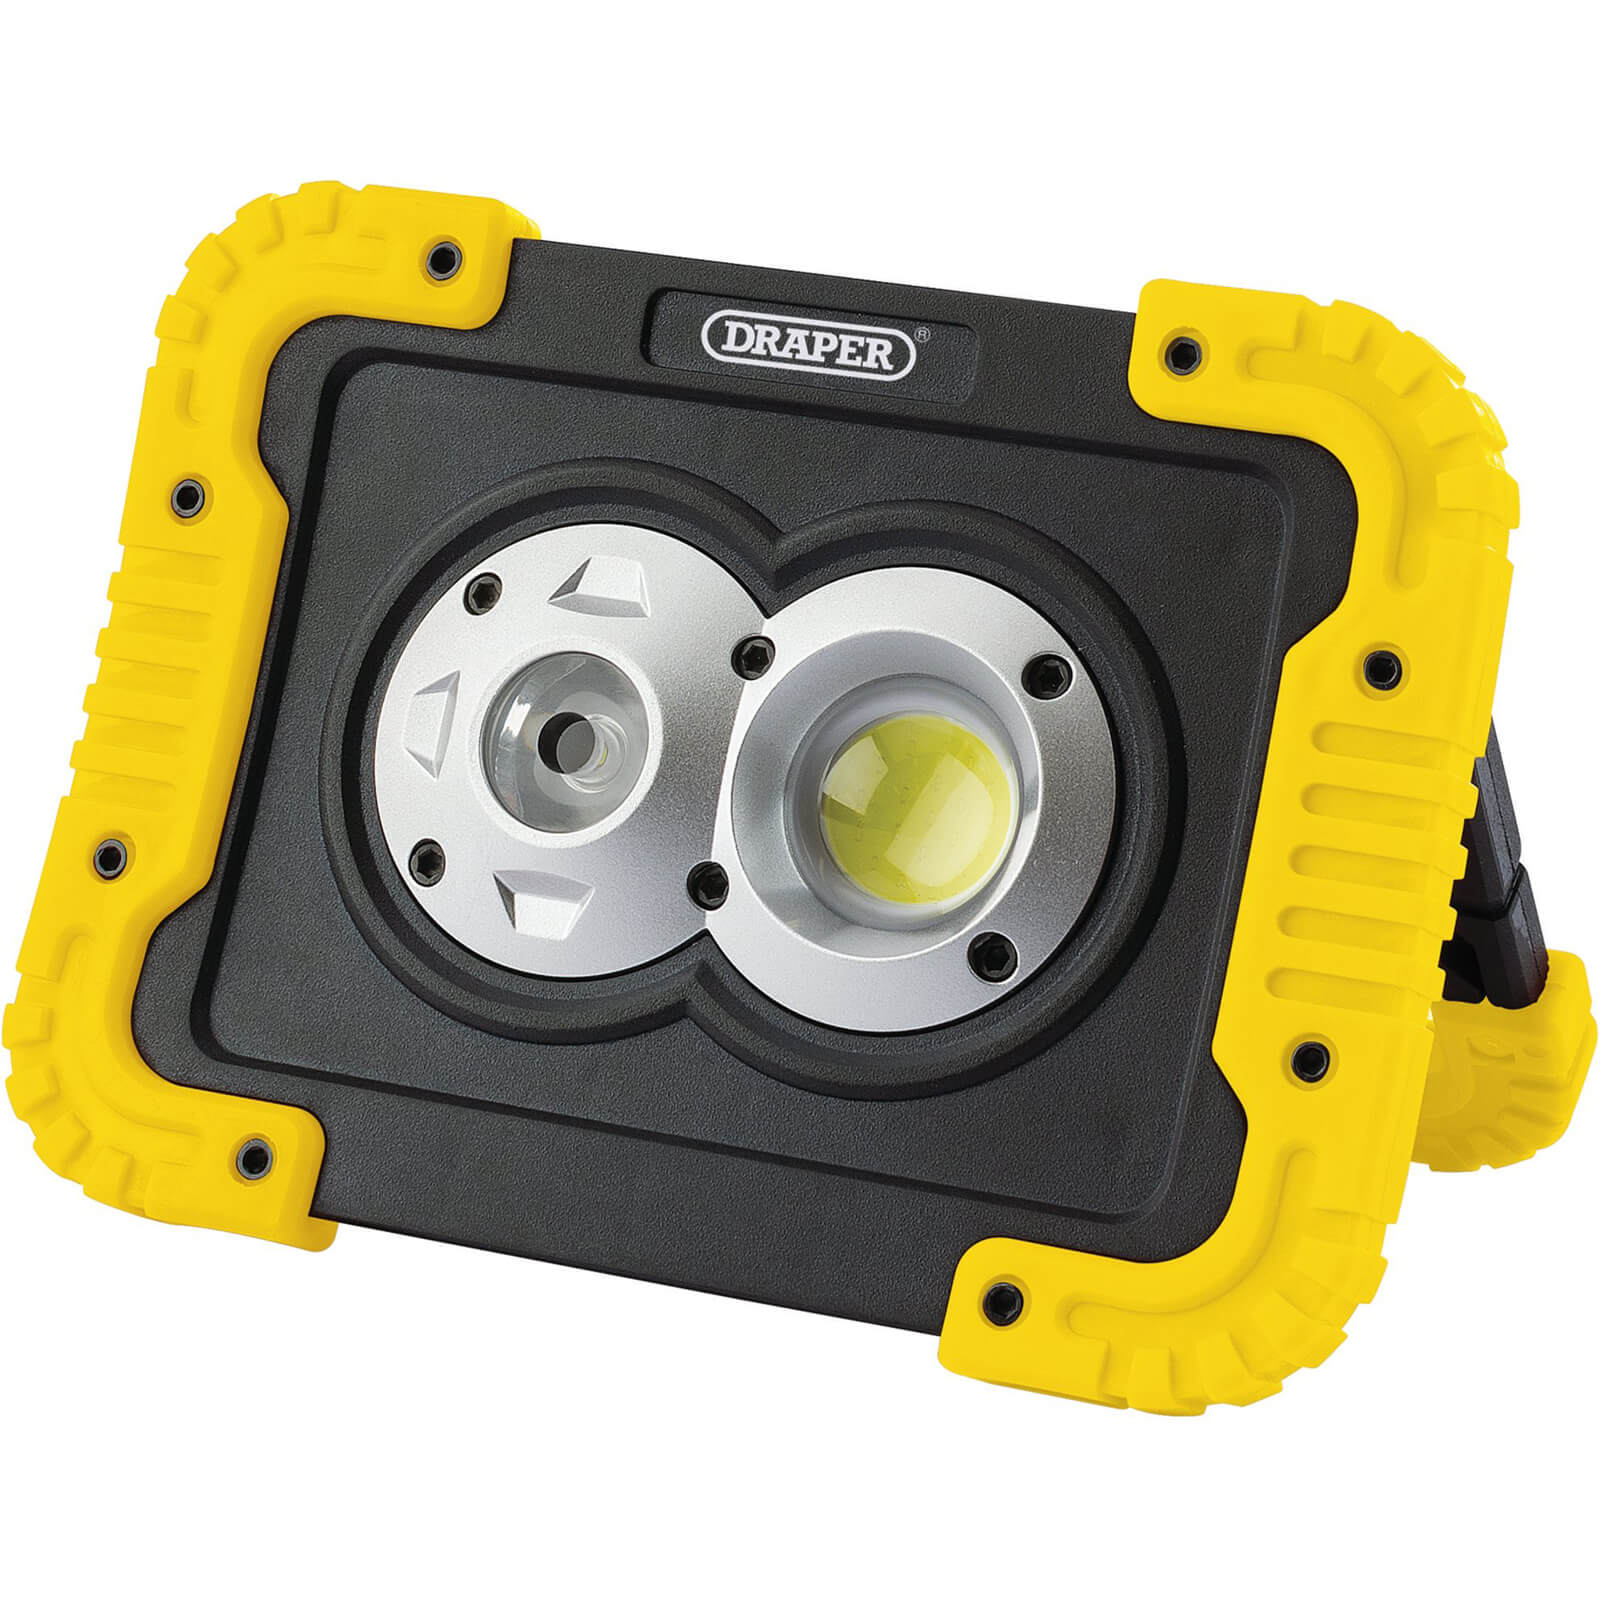 Image of Draper Rechargeable COB LED Worklight and Powerbank